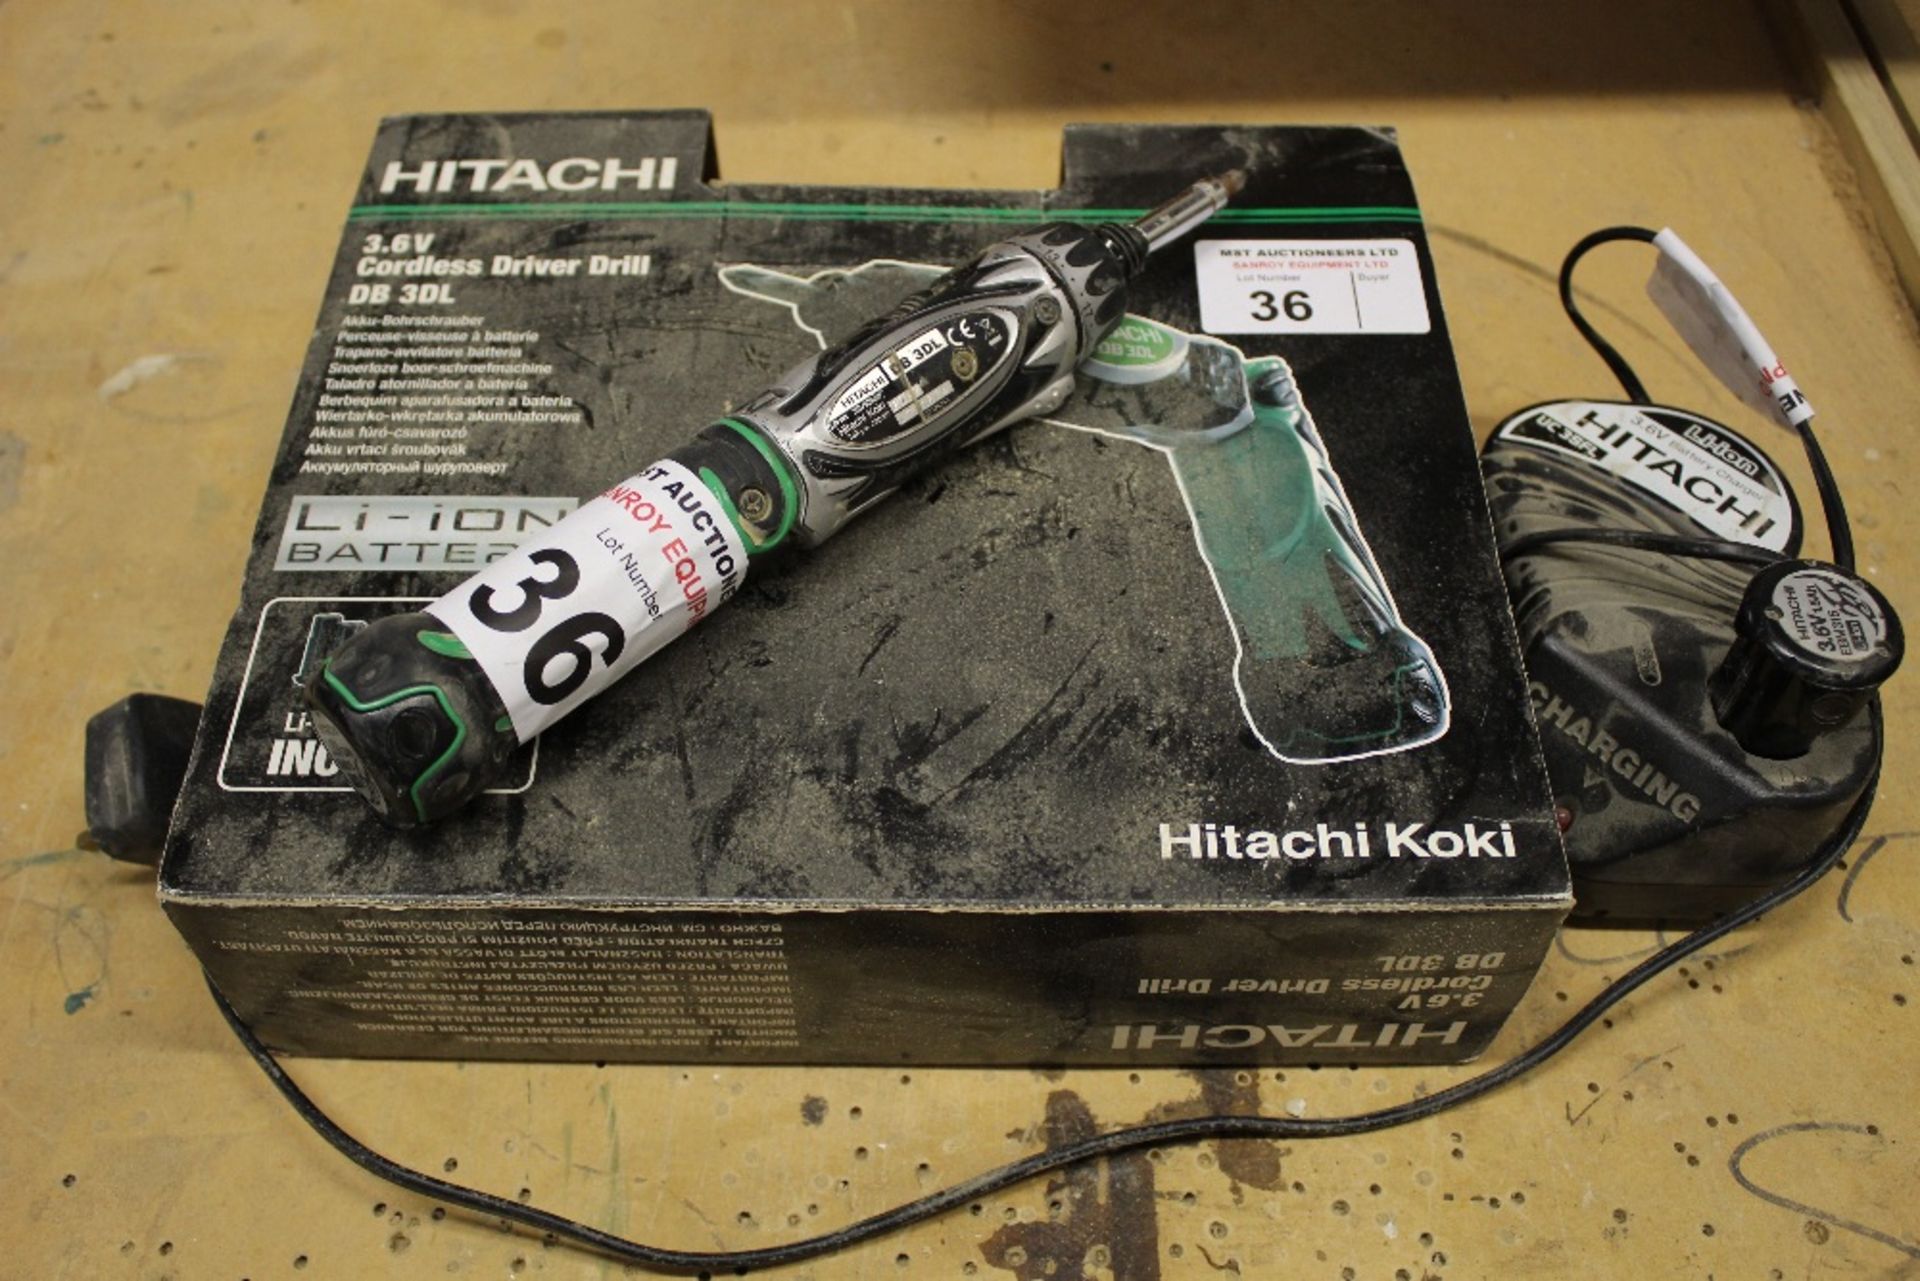 1 cordless drill by Hitachi type DB3DL supplied with 2 Li-ion batteries & 1 charger